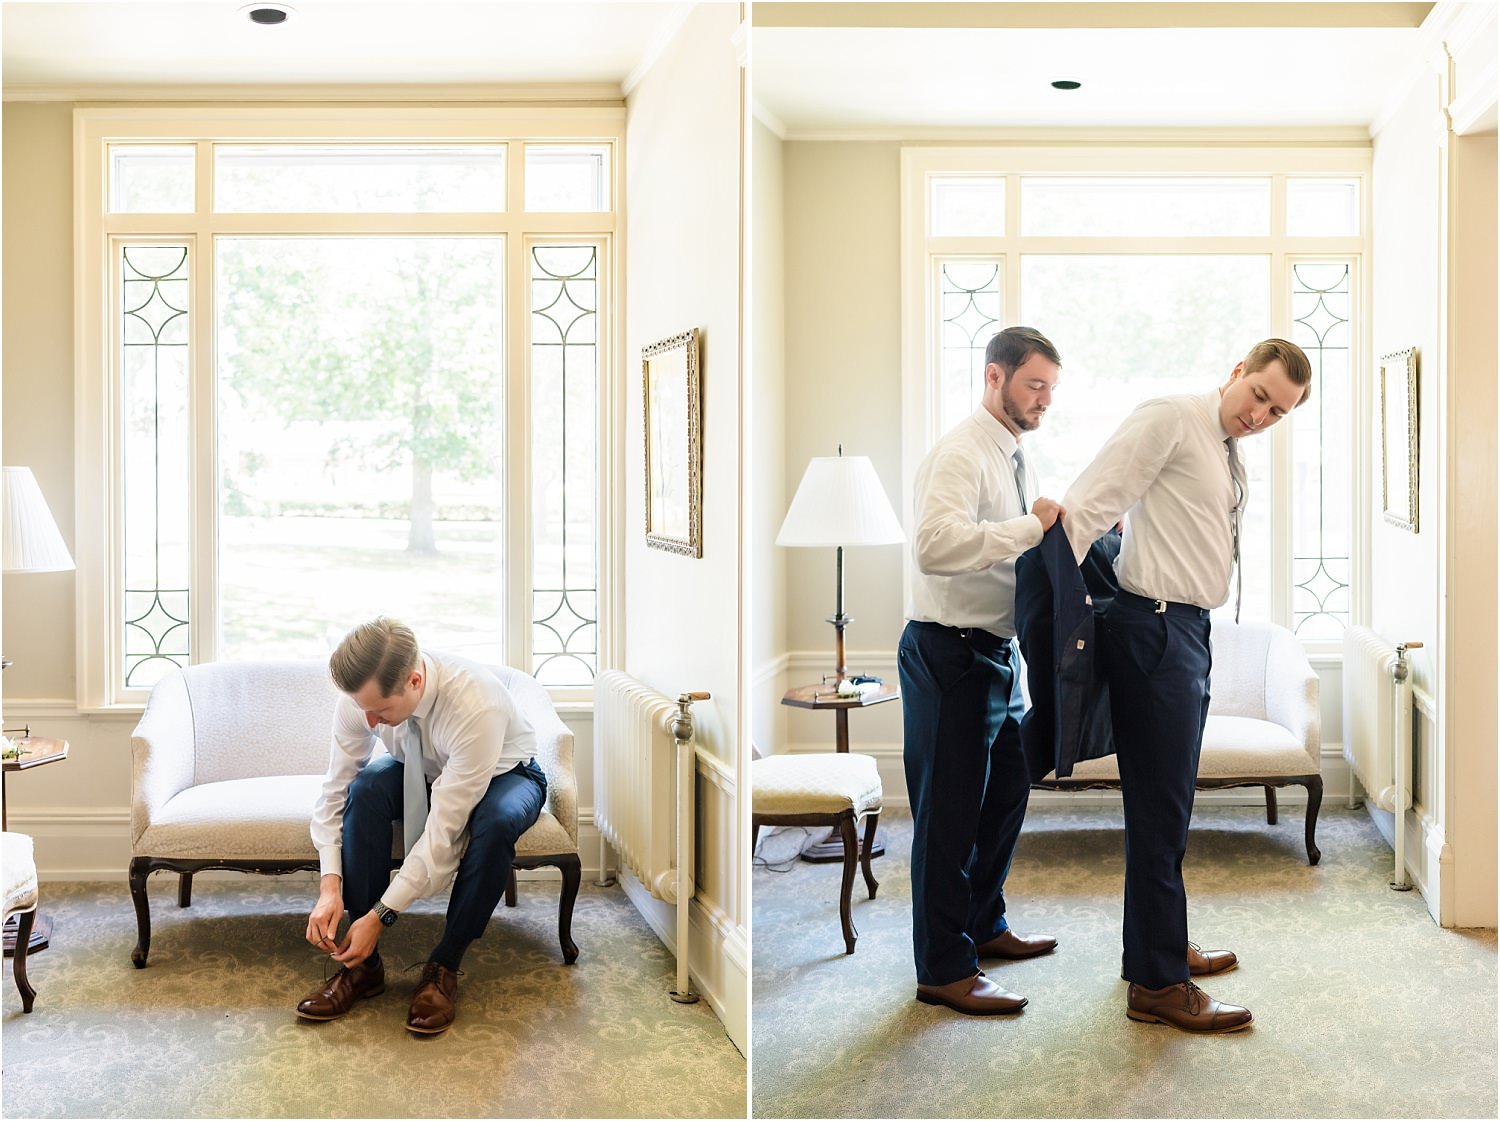  A groom puts his shoes and blue suit jacket.  